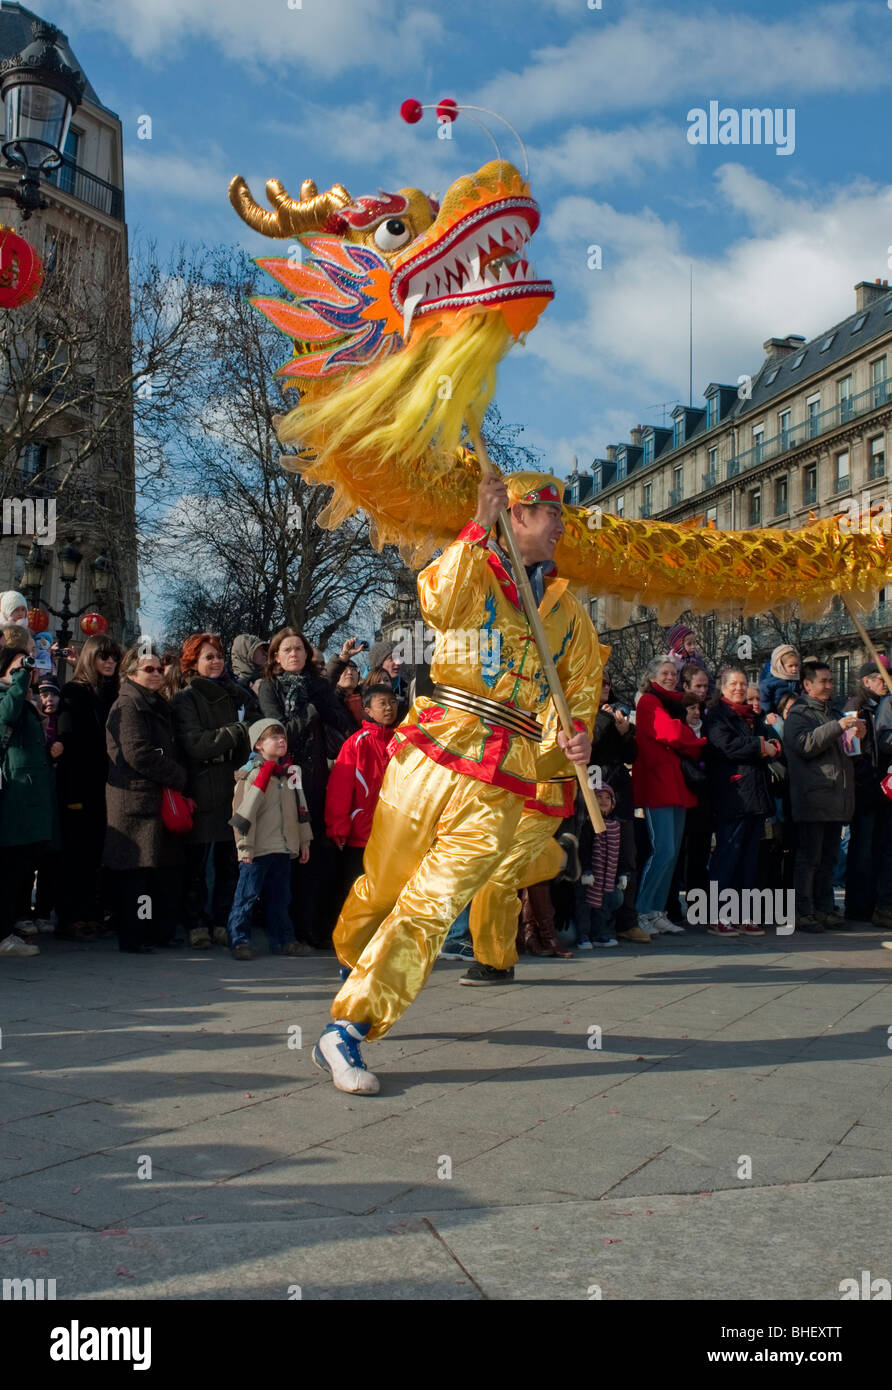 Paris, France, Asians Celebrating Chinese New year, Annual Street Carnival Parade, 'Chinese Dragons' Dancing, Chinatown  Chinese Dragon Dance, Stock Photo